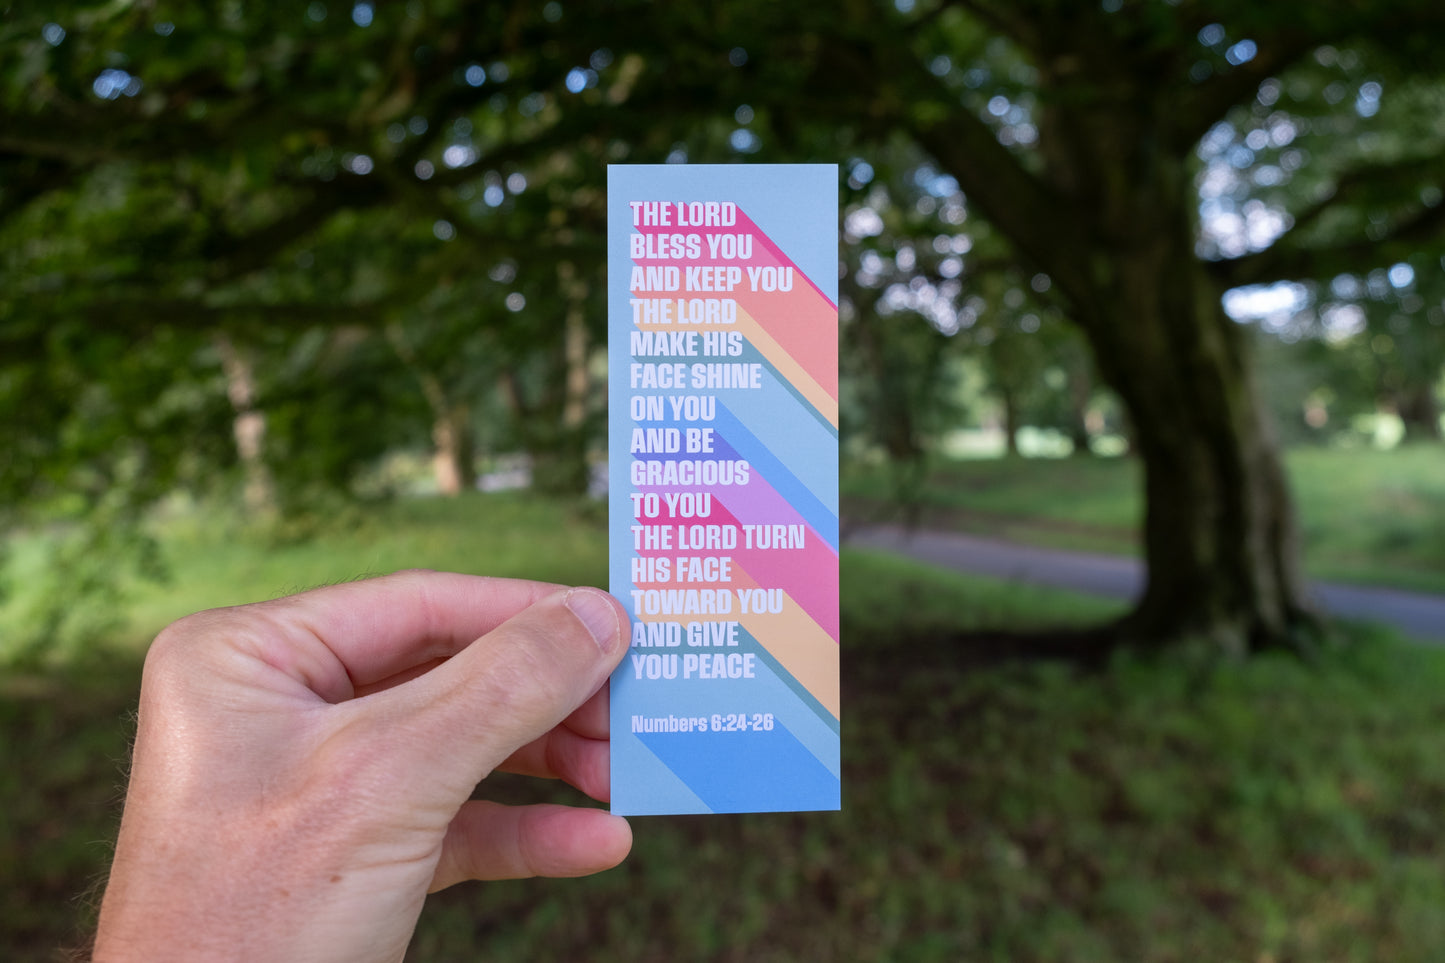 Pack of 80 Christian bookmarks. One design. 'The Lord bless you and keep you'. Numbers 6:24-26